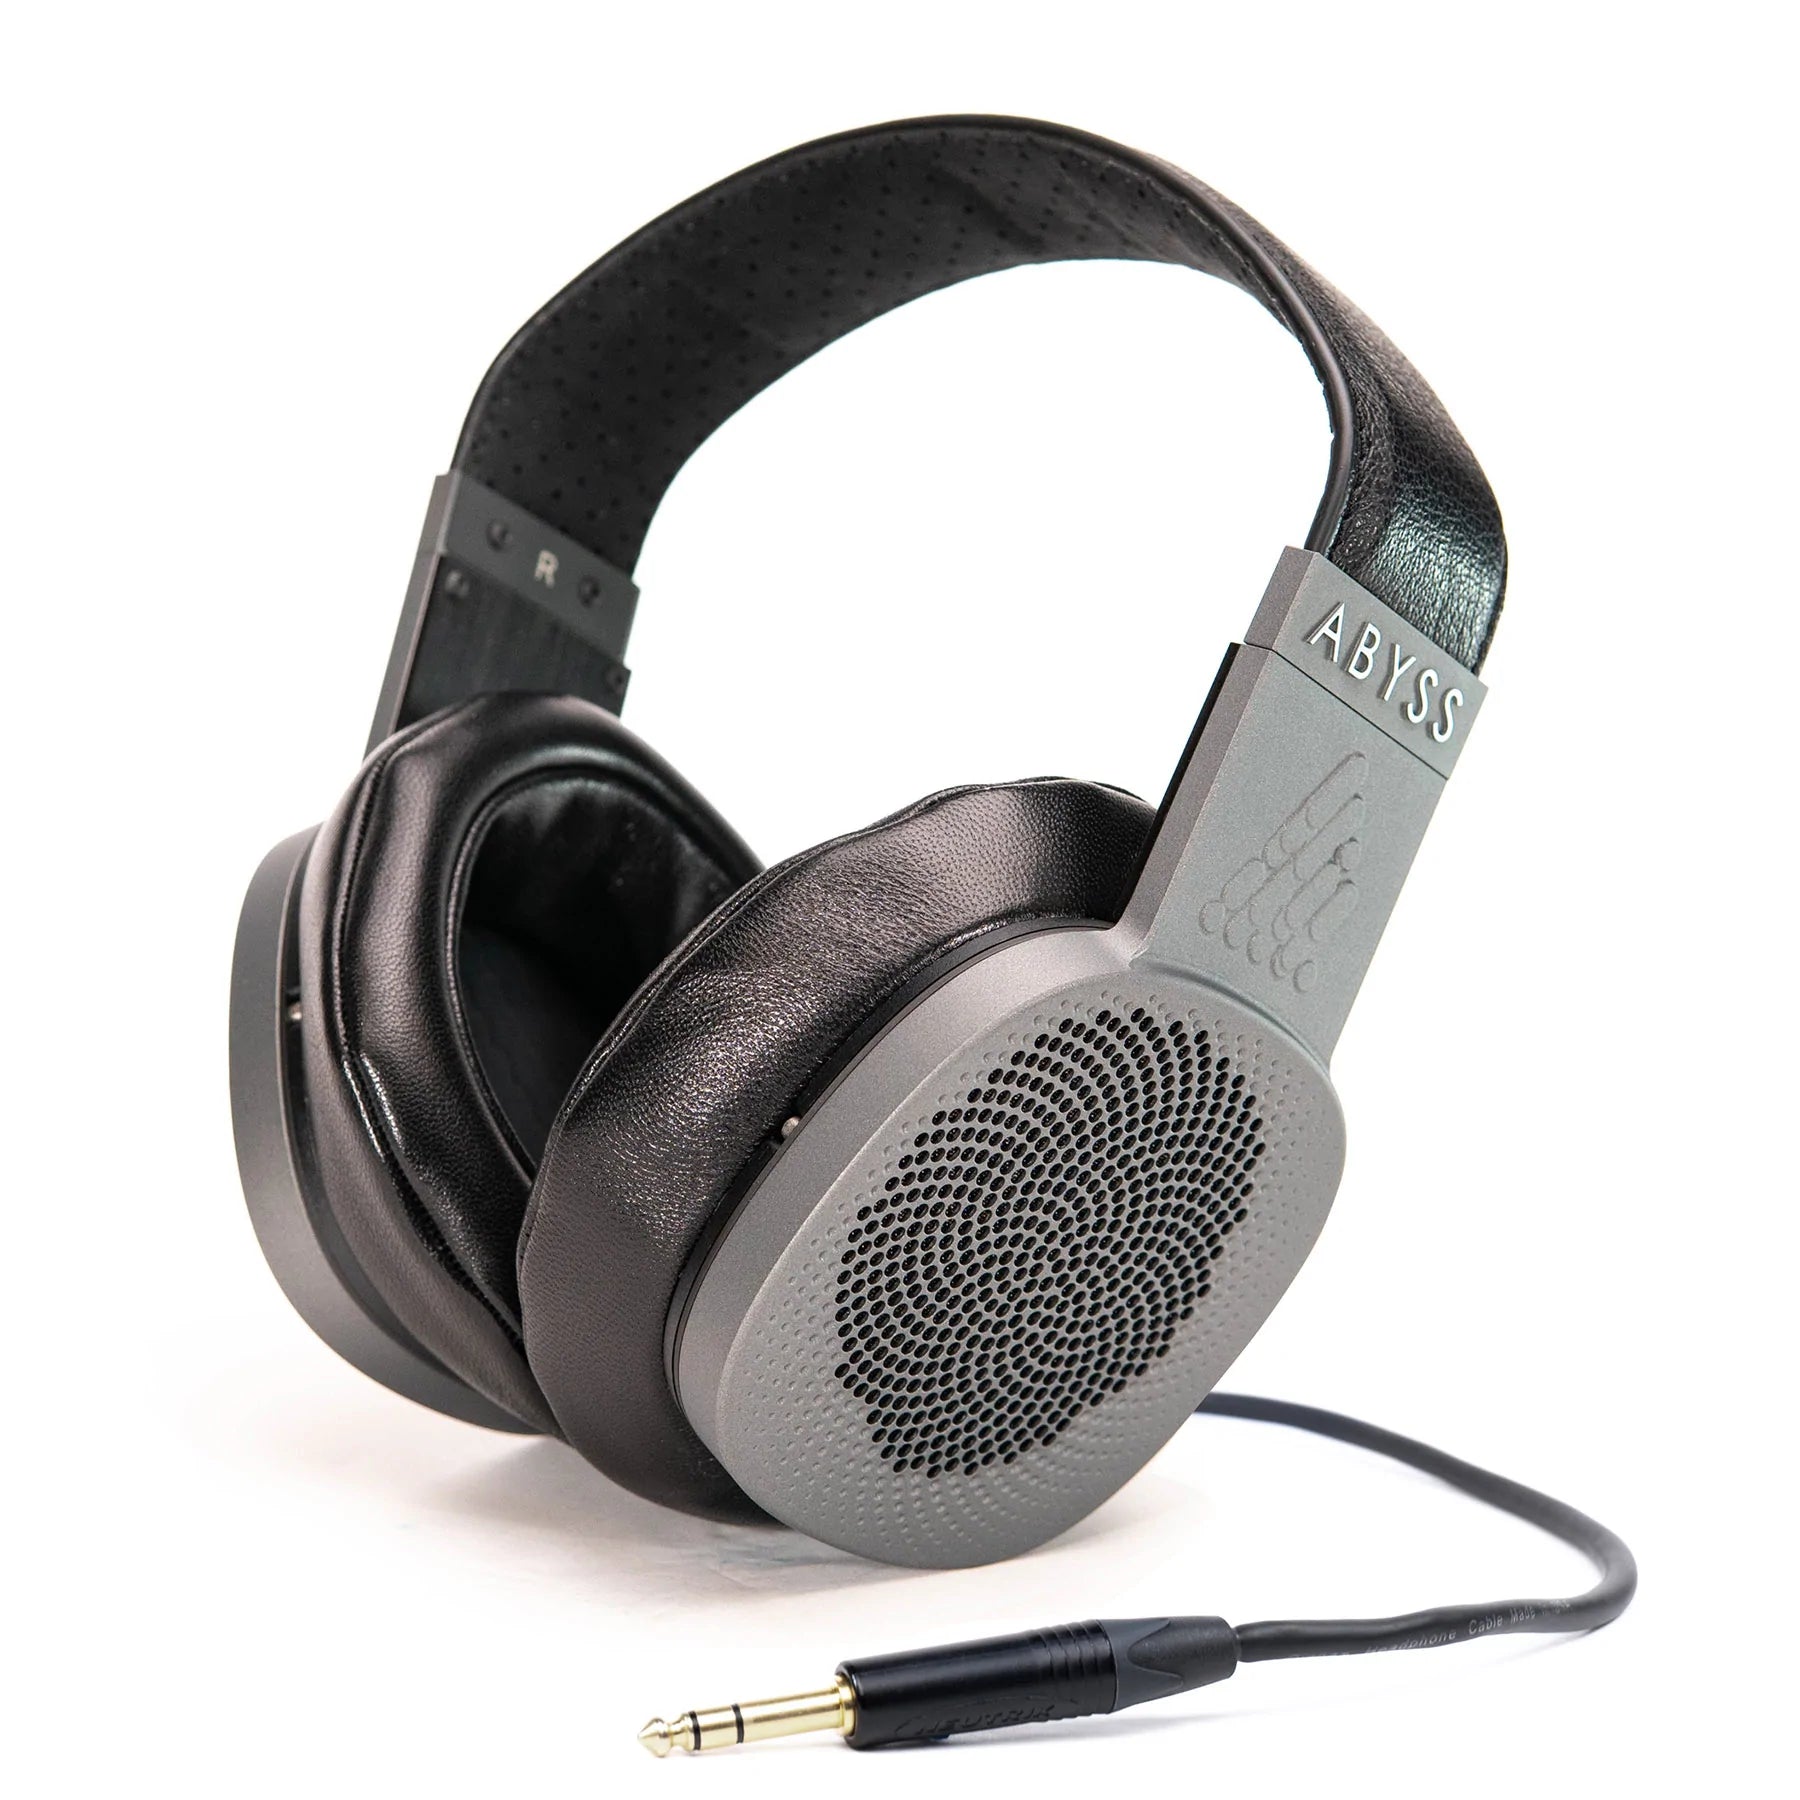 DIANA TC by ABYSS Premium Audiophile Headphone